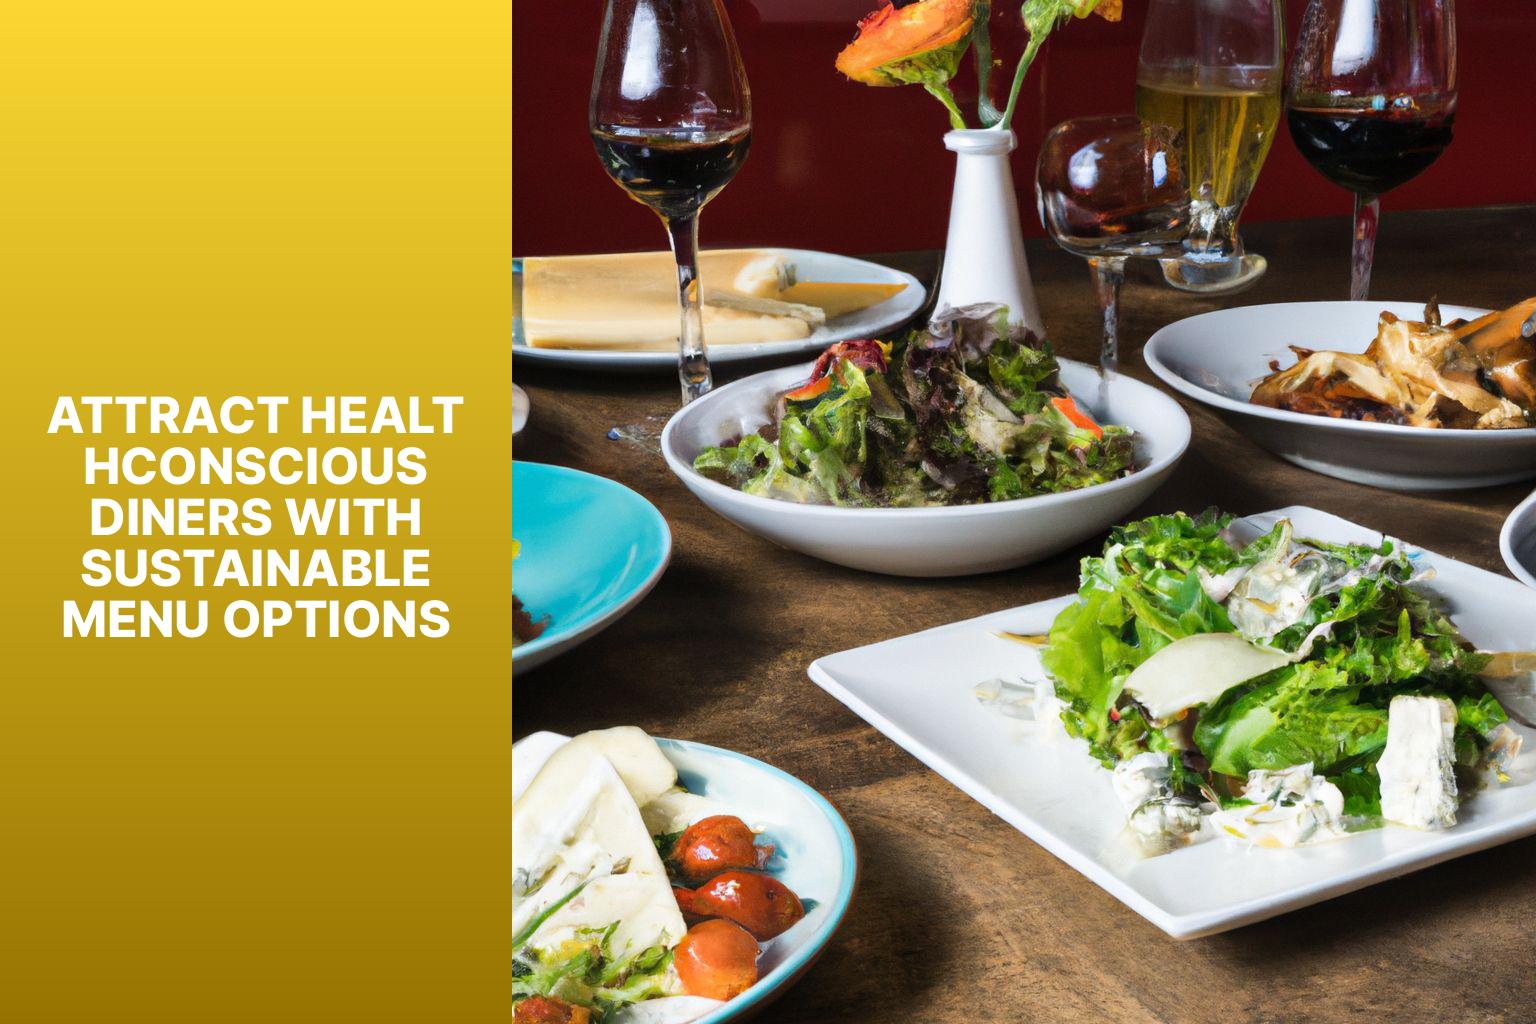 Attract HealthConscious Diners with Sustainable Menu Options